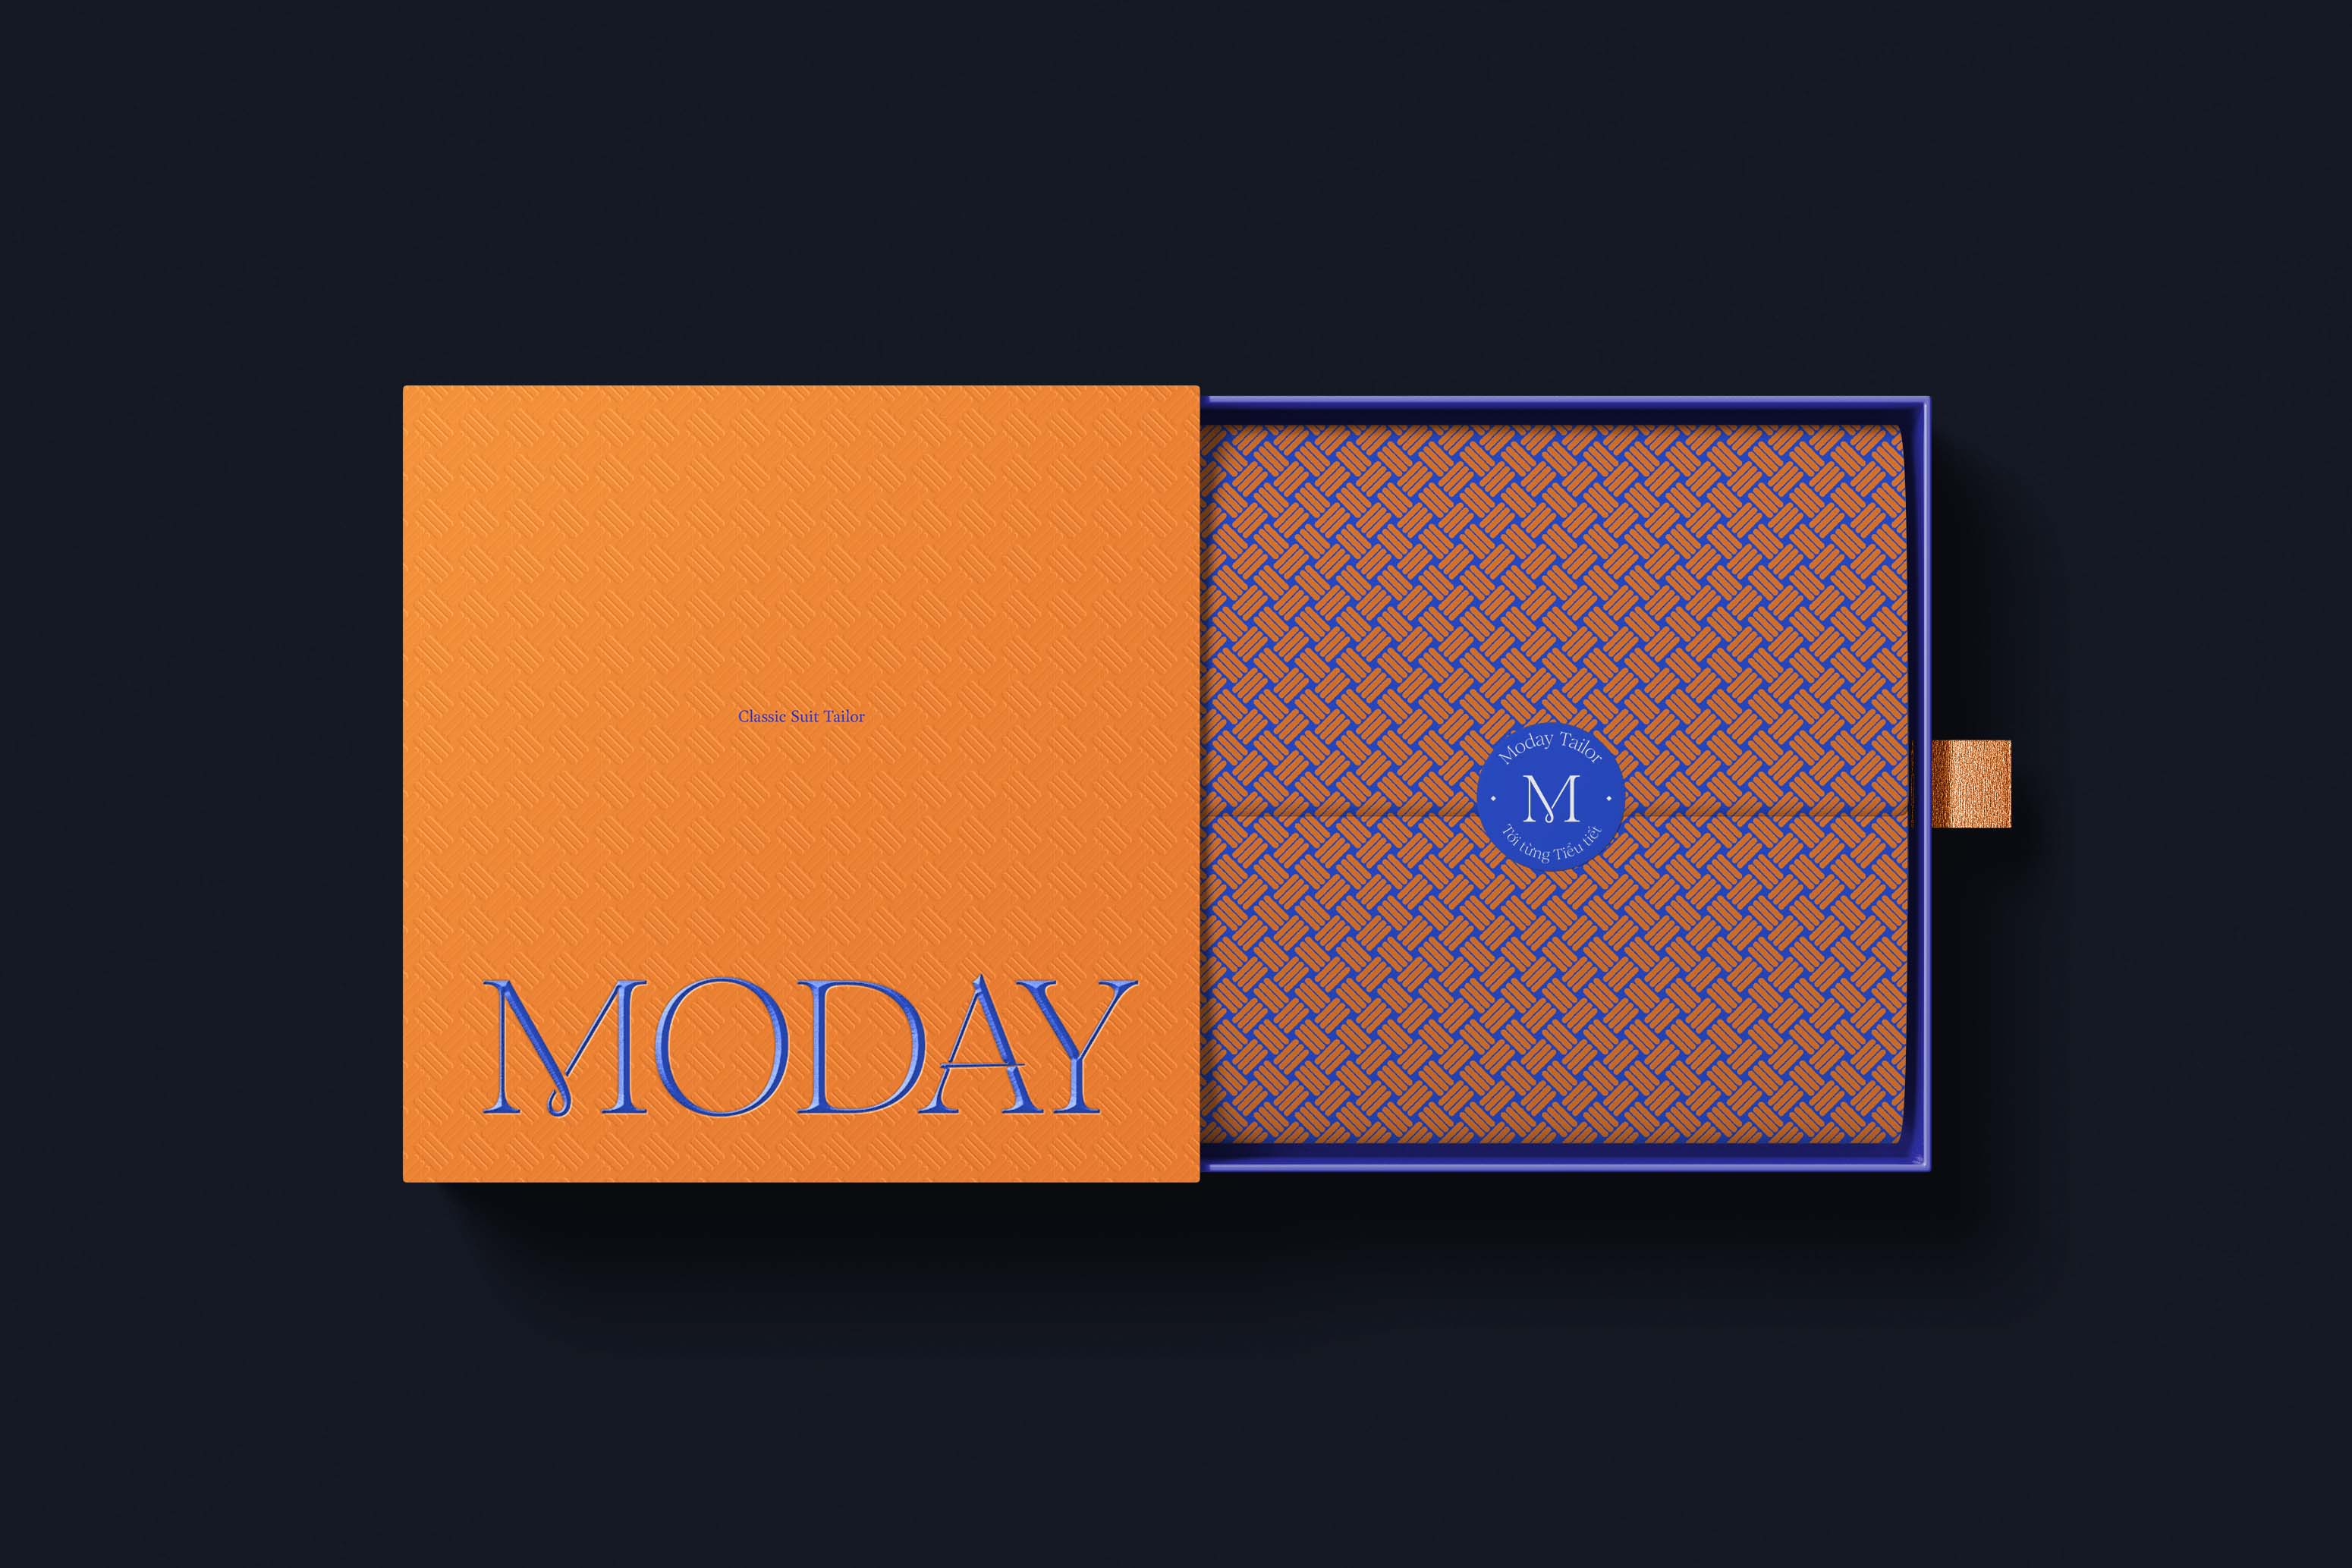 Moday Classic Suit Tailor Branding by Row Nguyen